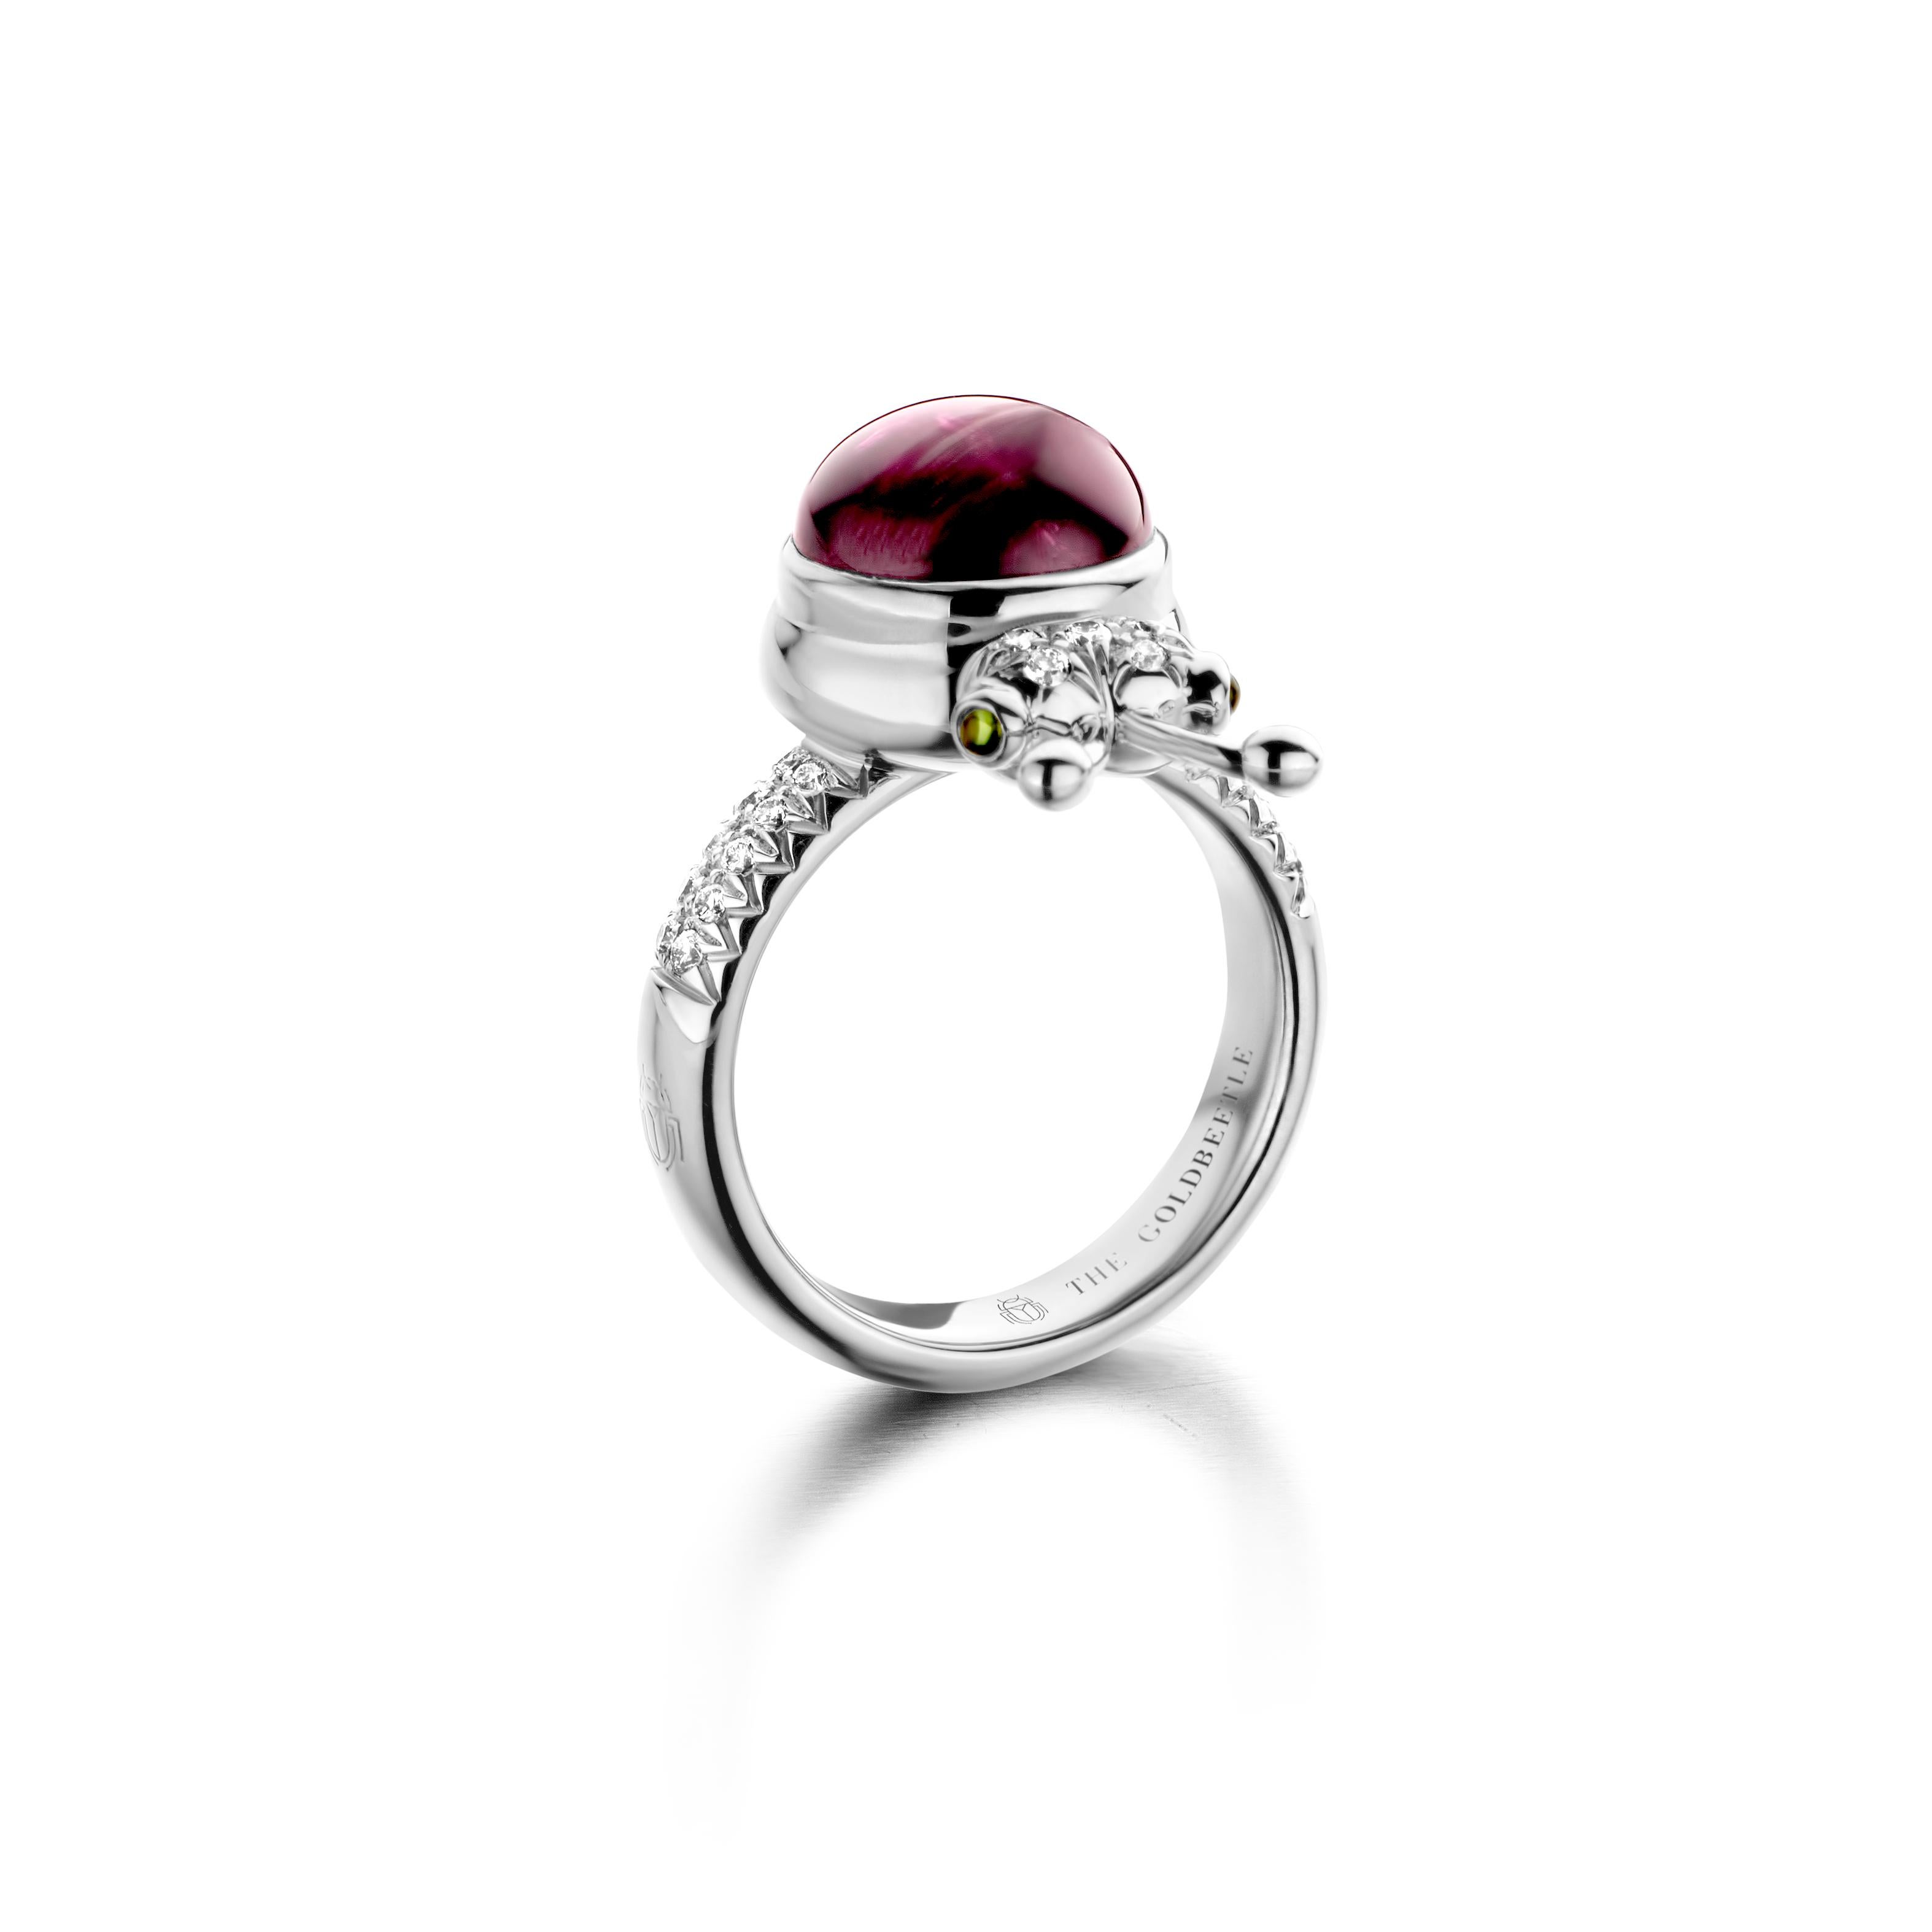 One of a kind lucky beetle ring in 18K rose gold 10g set with the finest diamonds in brilliant cut 0,23Ct (VVS/DEF quality) one natural, rhodolite garnet in round cabochon cut 6,00Ct and two tsavorites in round cabochon cut. 

Celine Roelens, a